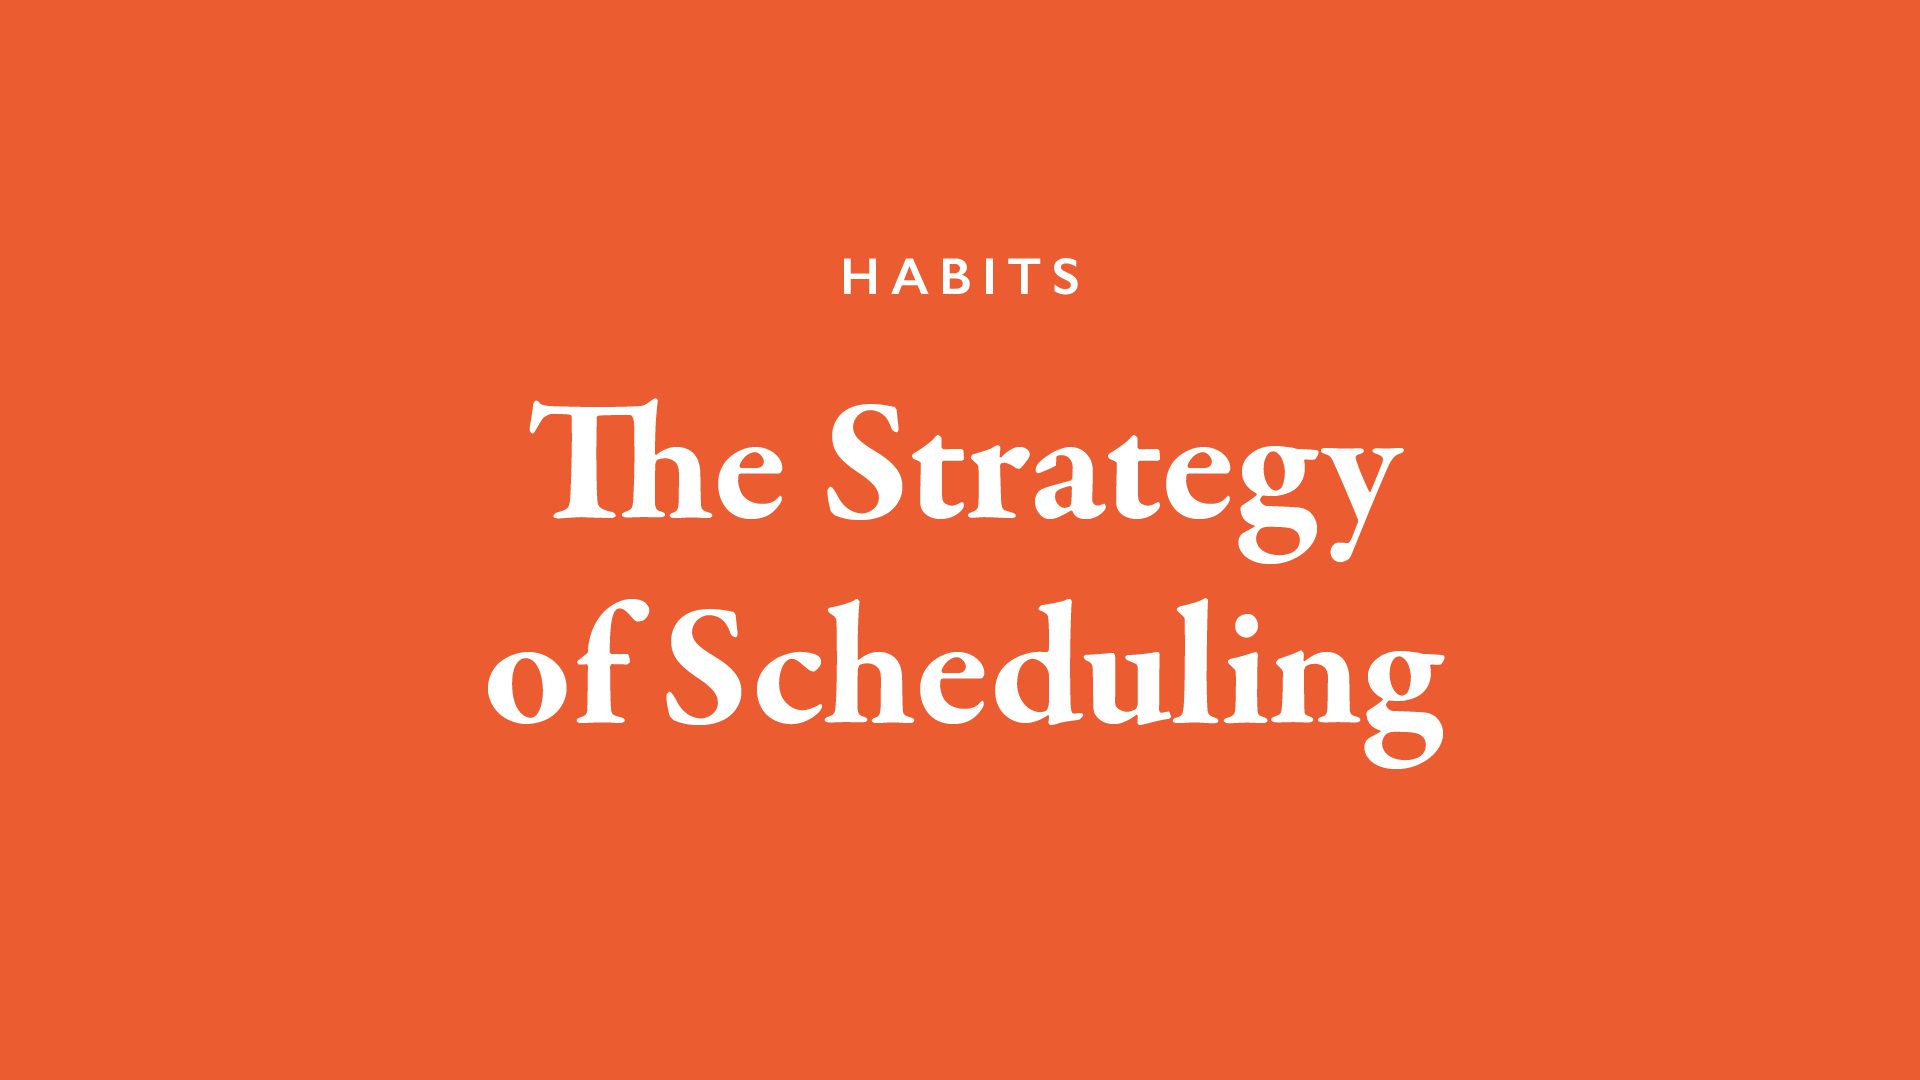 The strategy of scheduling video thumbnail